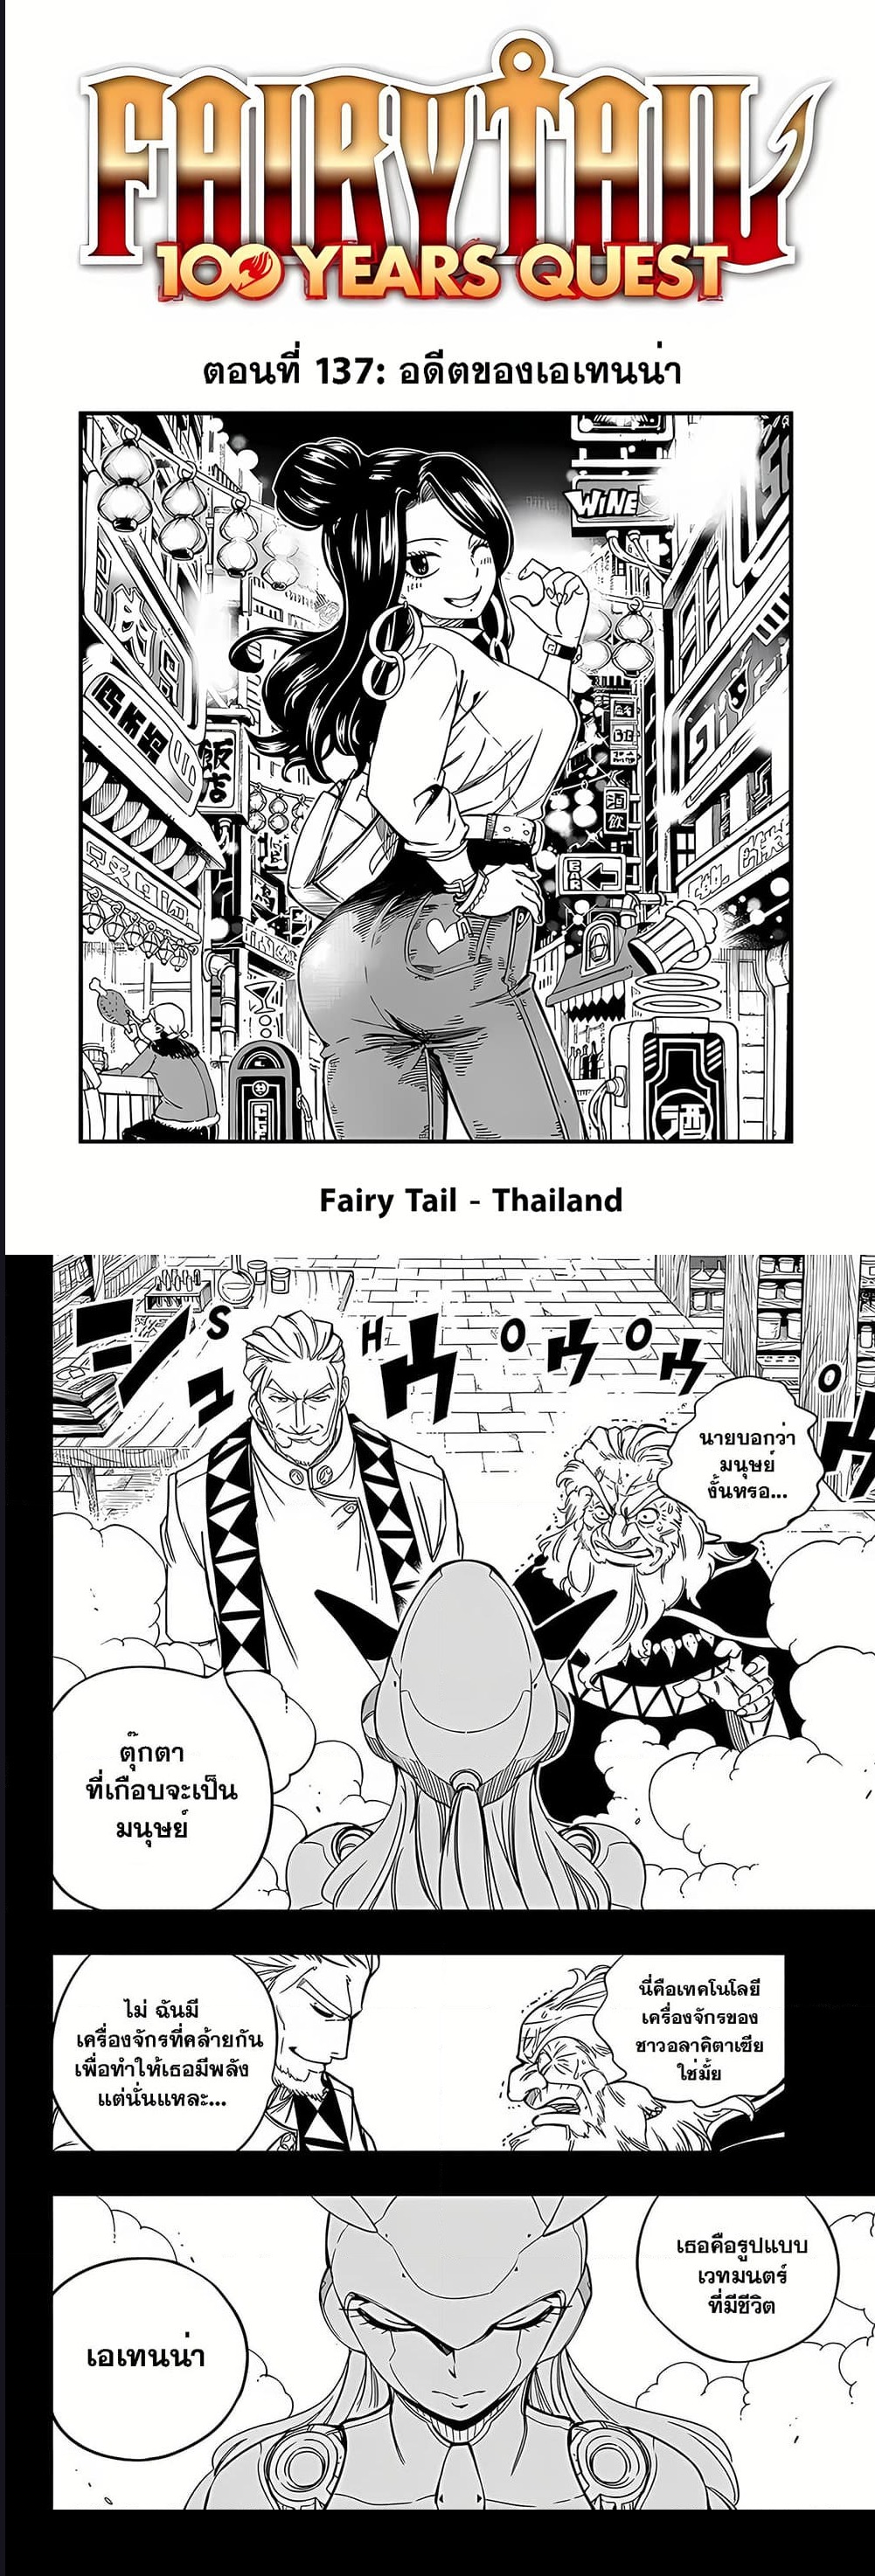 Fairy Tail 100 Years Quest ตอนที่ 137 (1)